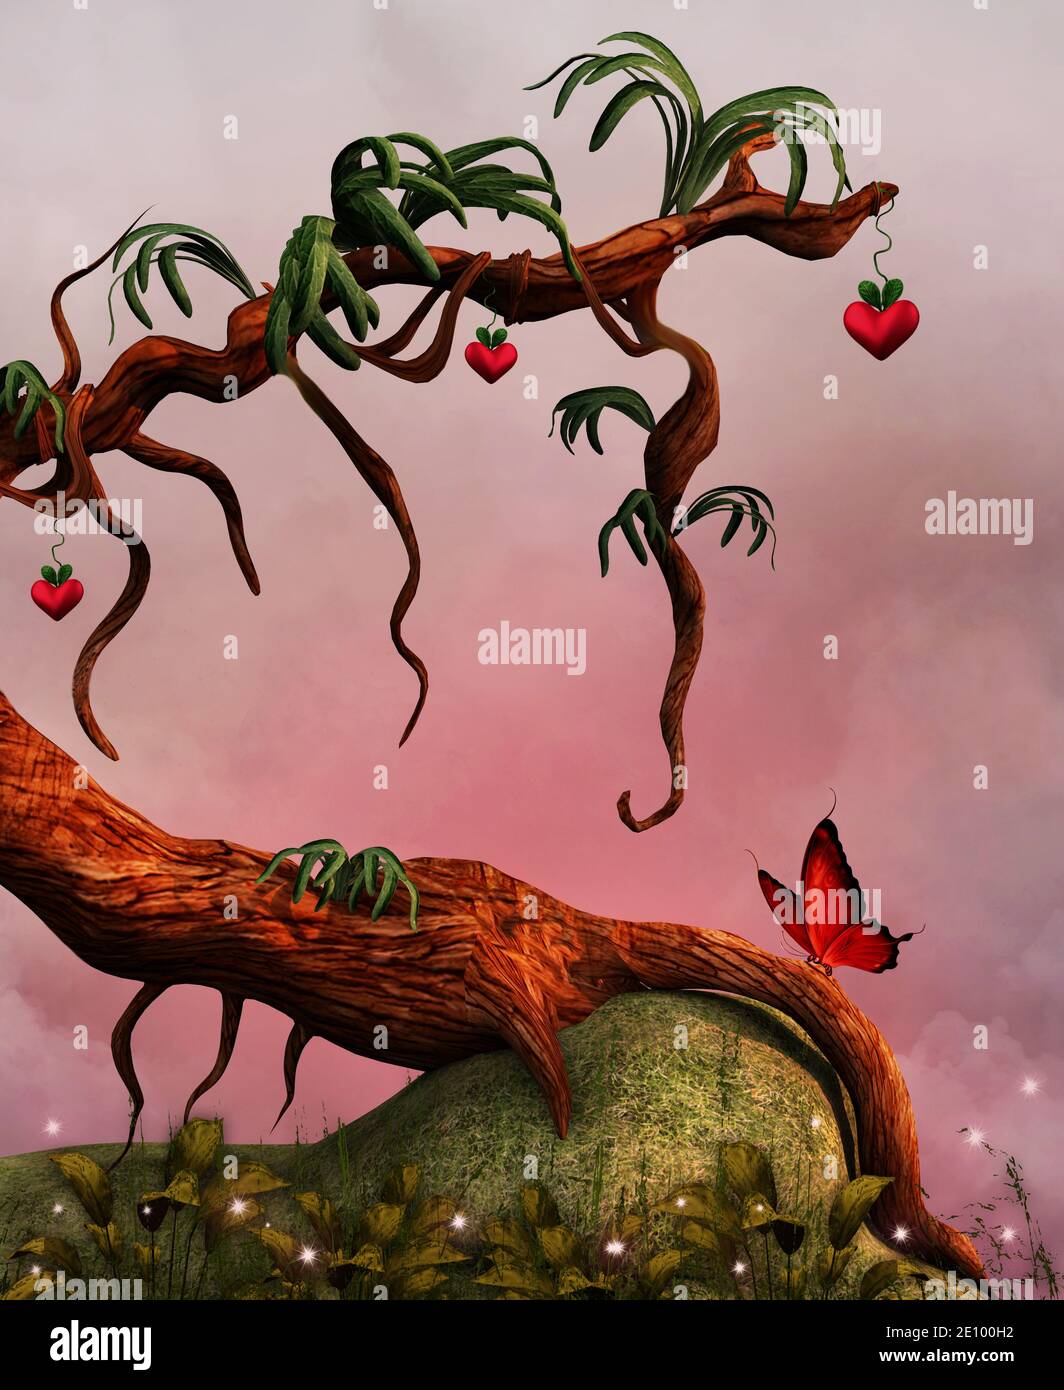 Surreal illustration of an old trunk with red hearts Stock Photo